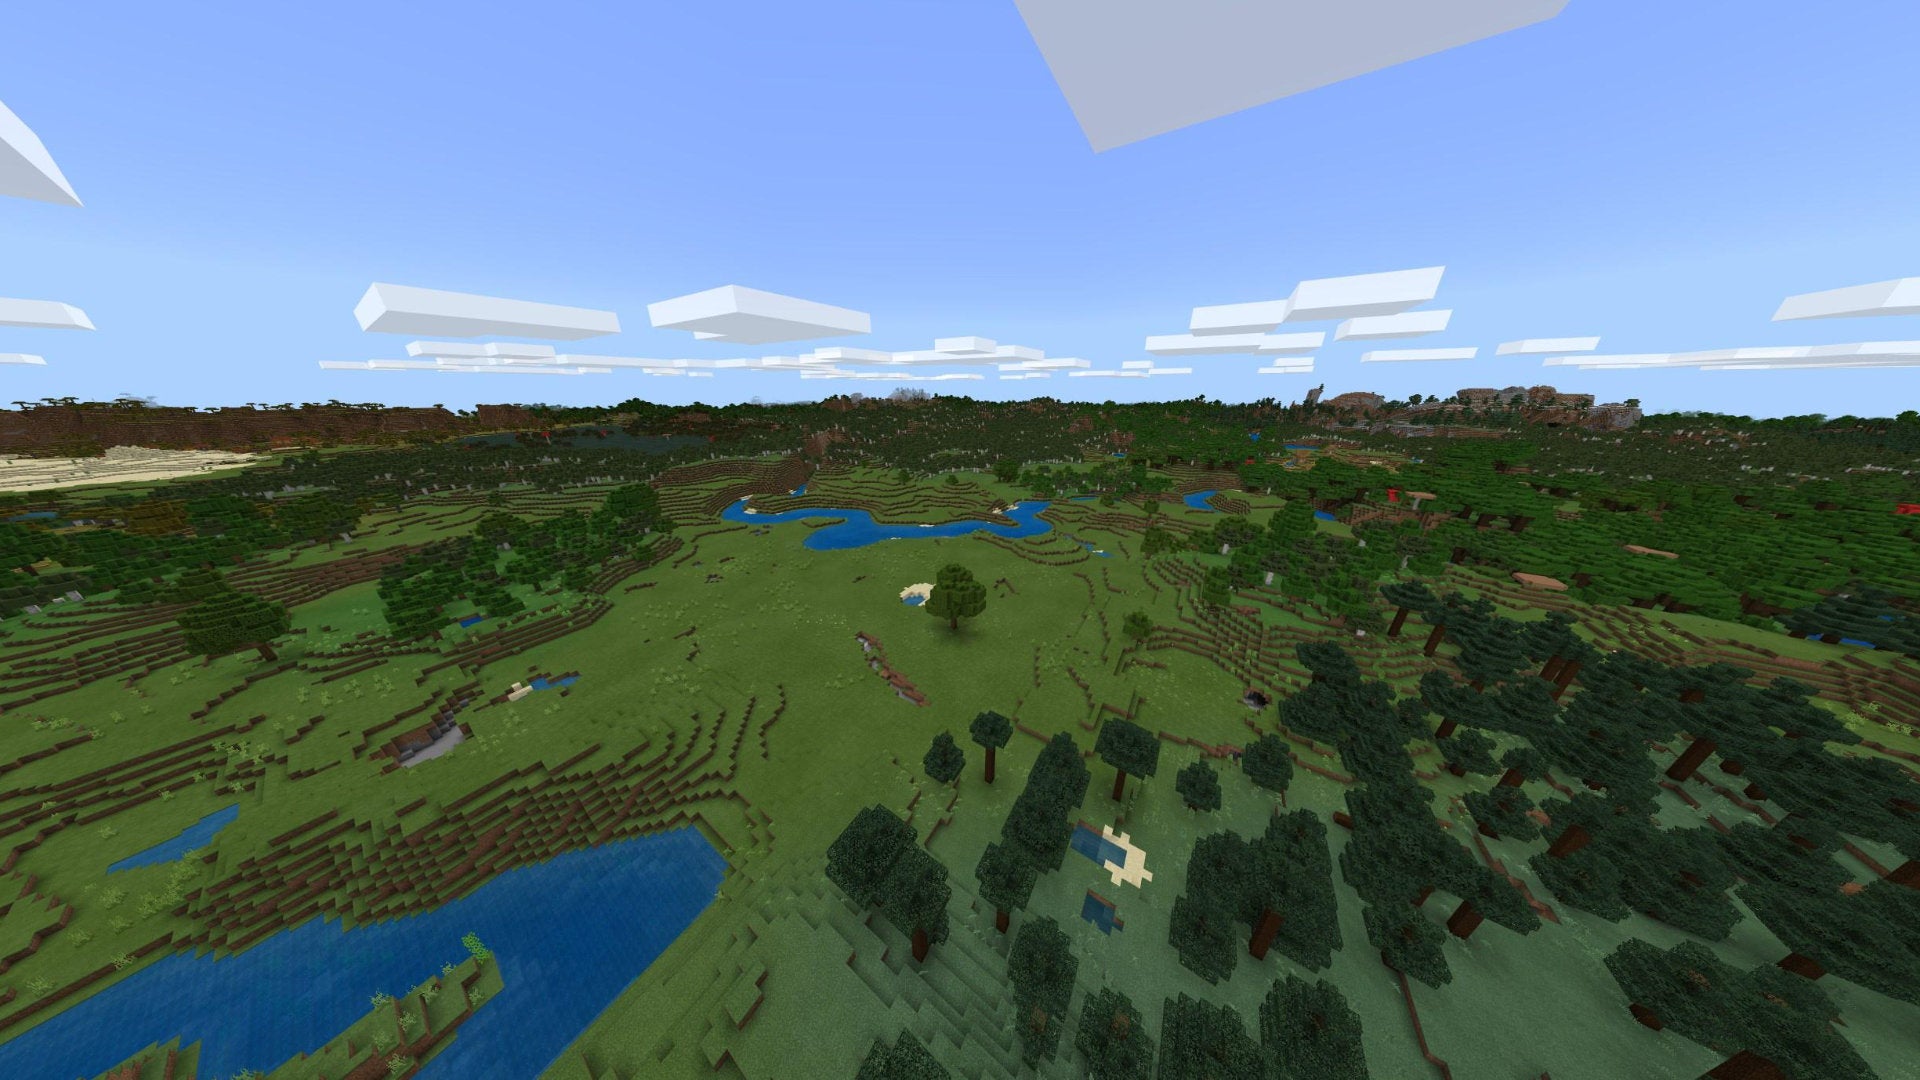 A Minecraft Bedrock screenshot of a new world created with the seed -1675222121.